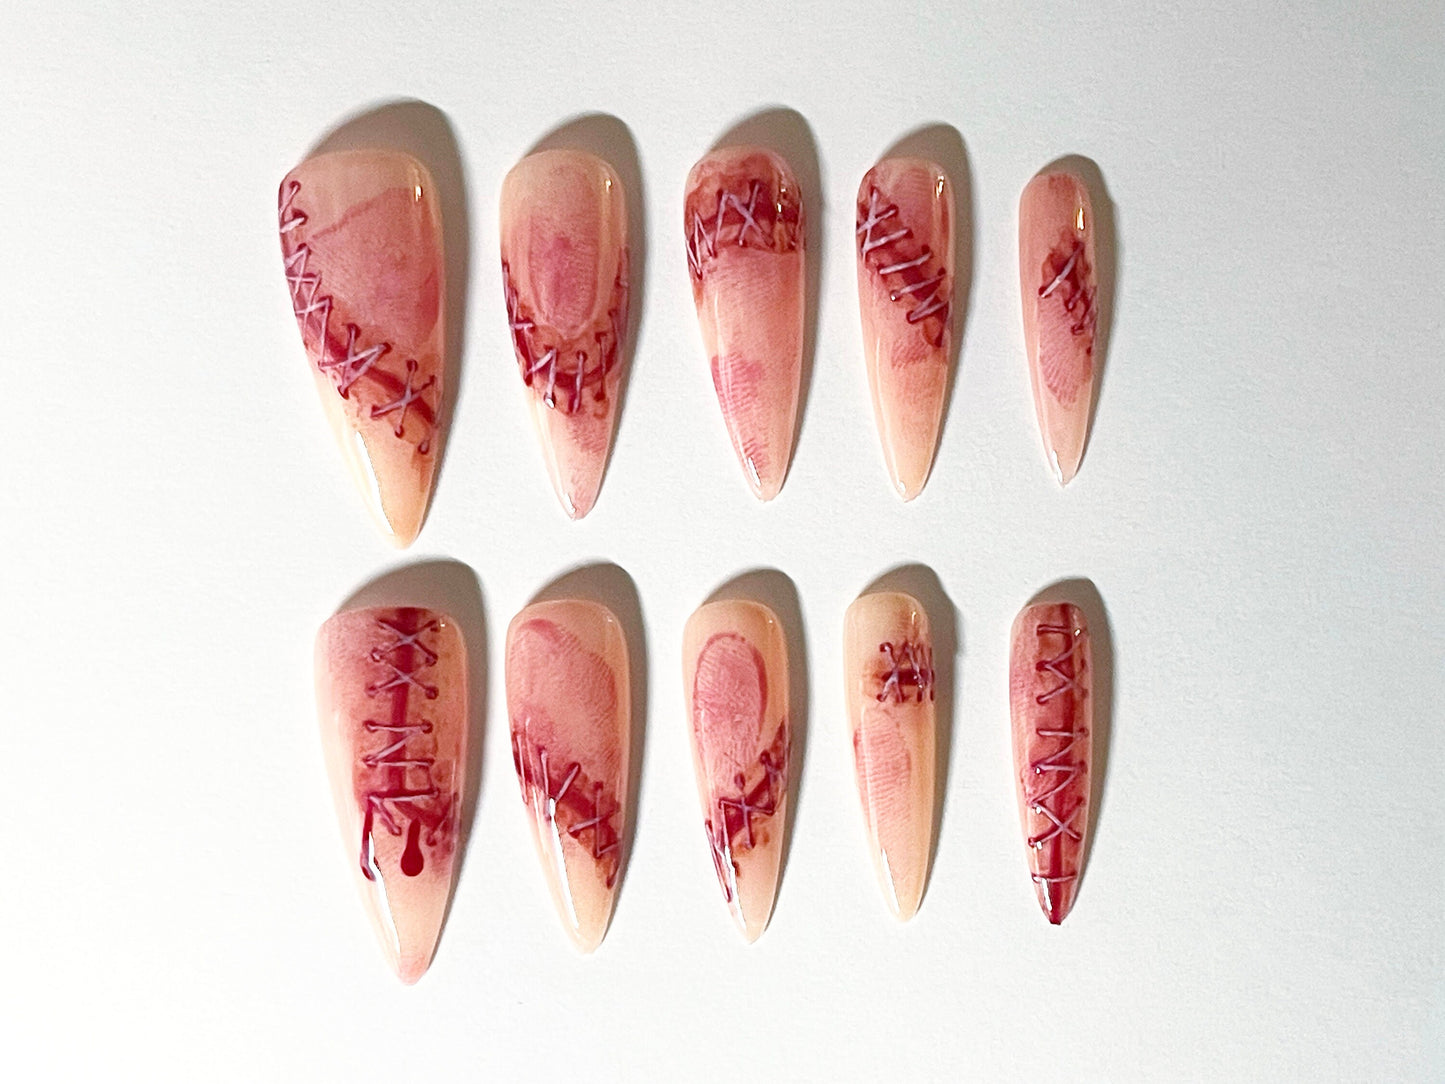 Halloween Horror Unveiled Bleeding Surgical Sutures and Bloody Fingerprints Customized Press on Nails- Made in USA, Hand painted.